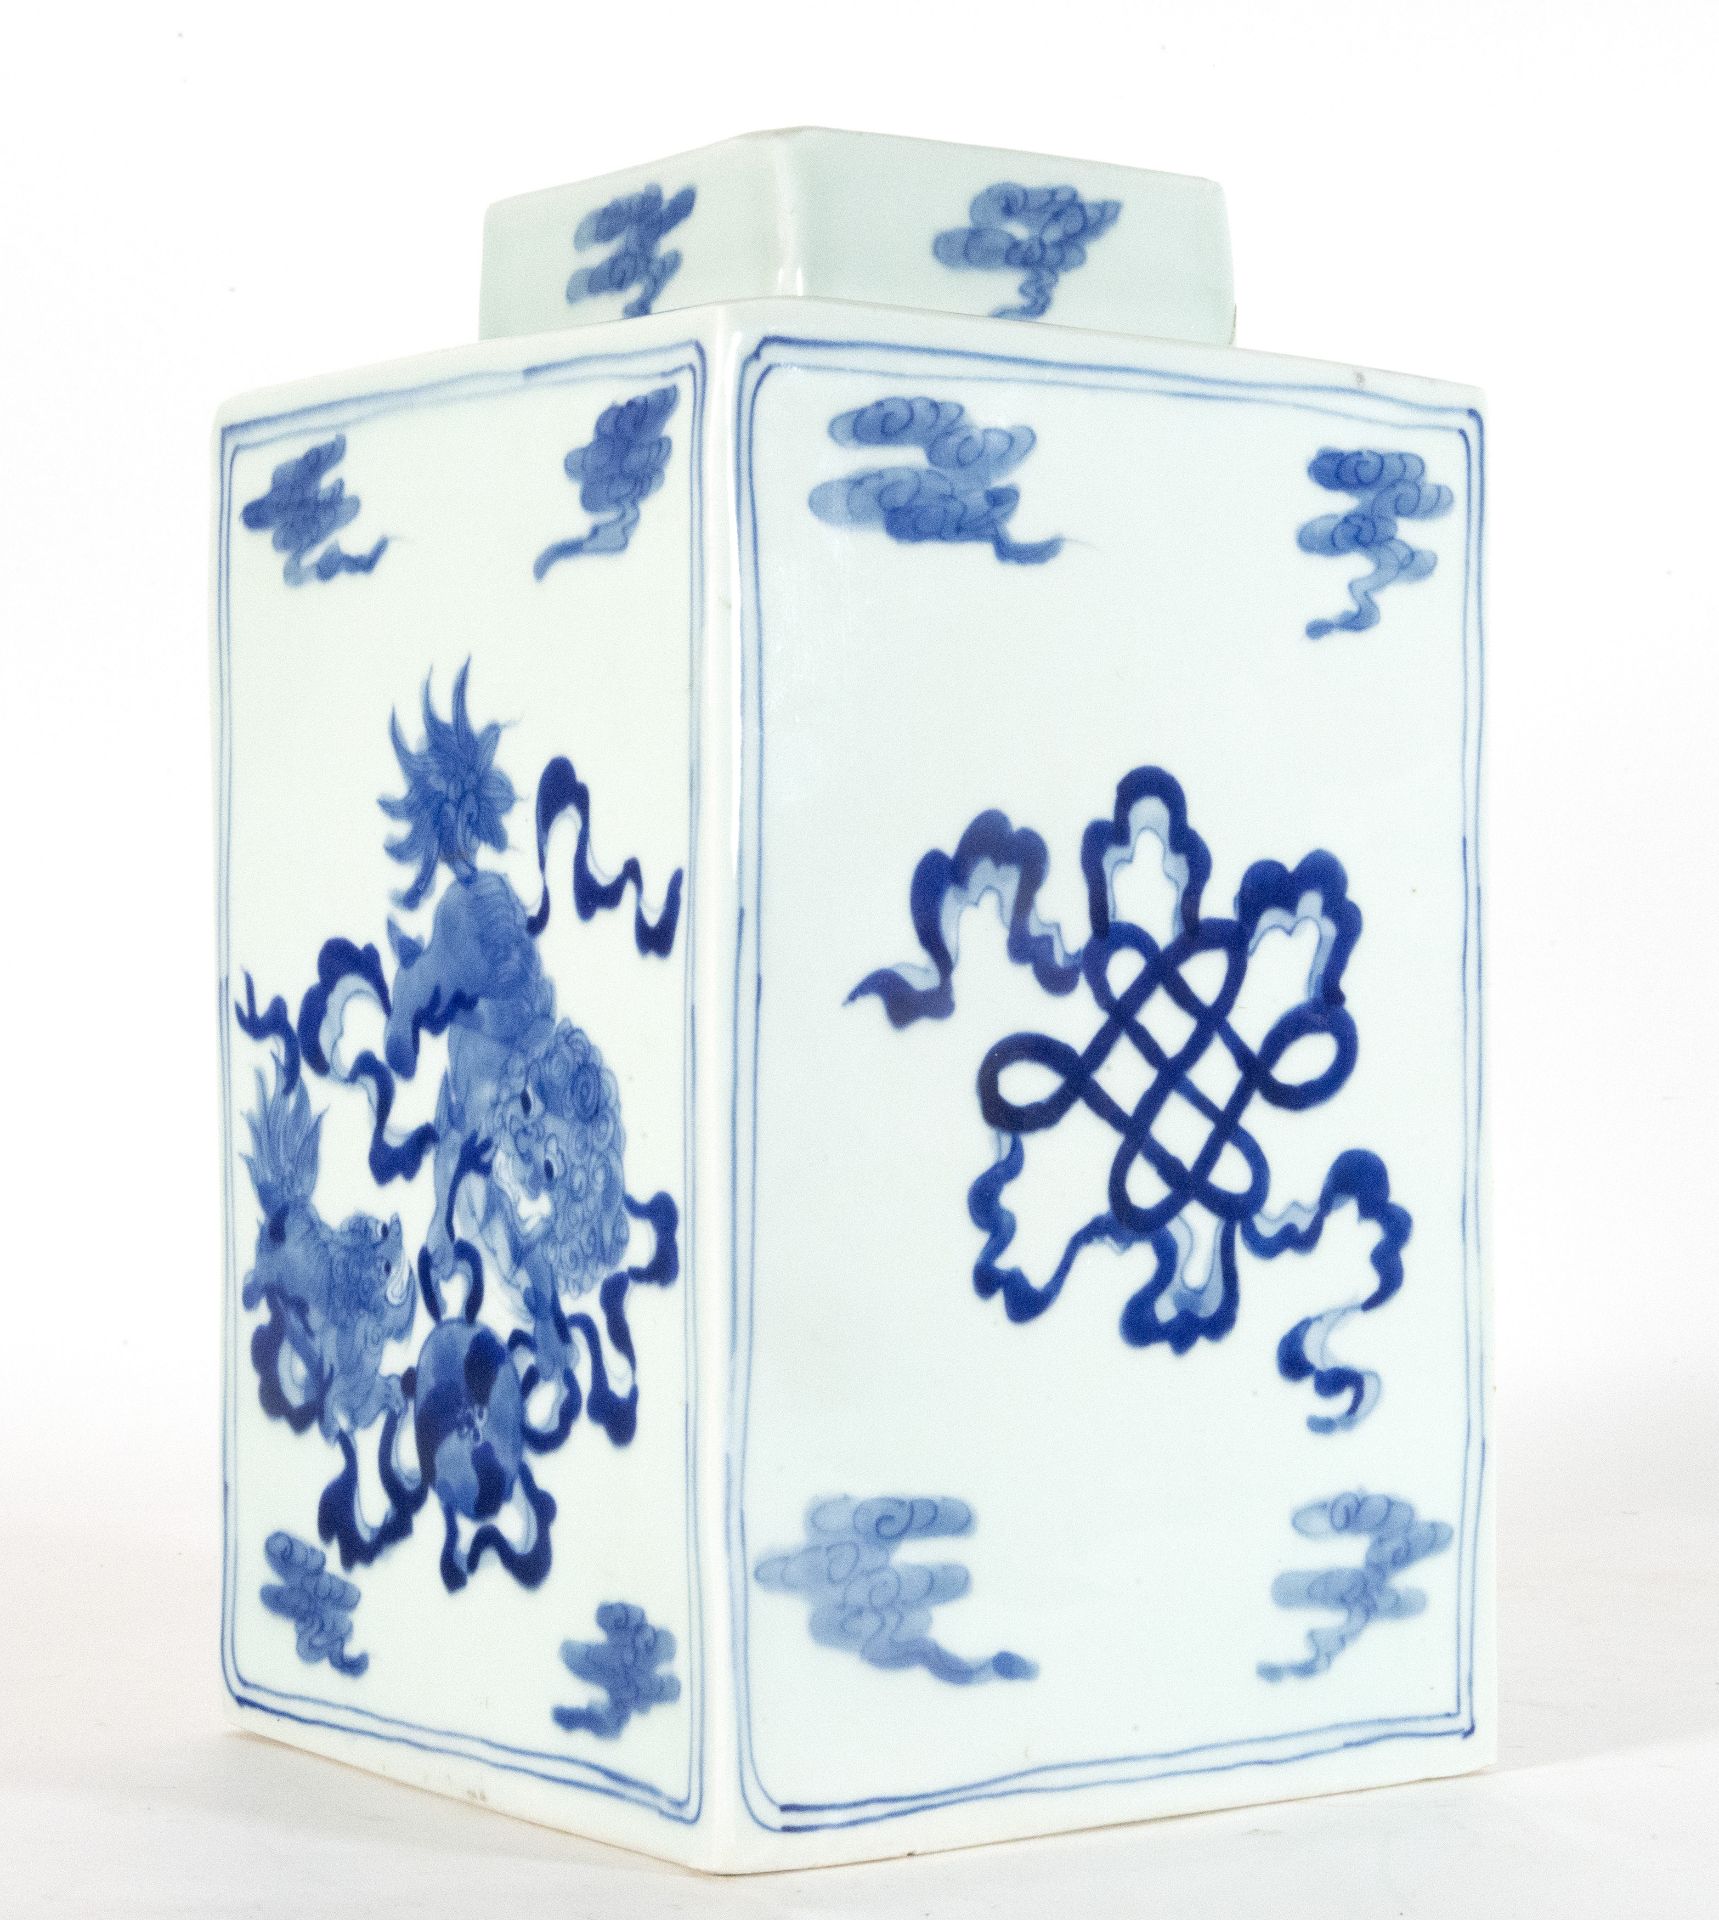 Chinese tibor in cobalt blue porcelain, late 19th century - Image 2 of 5